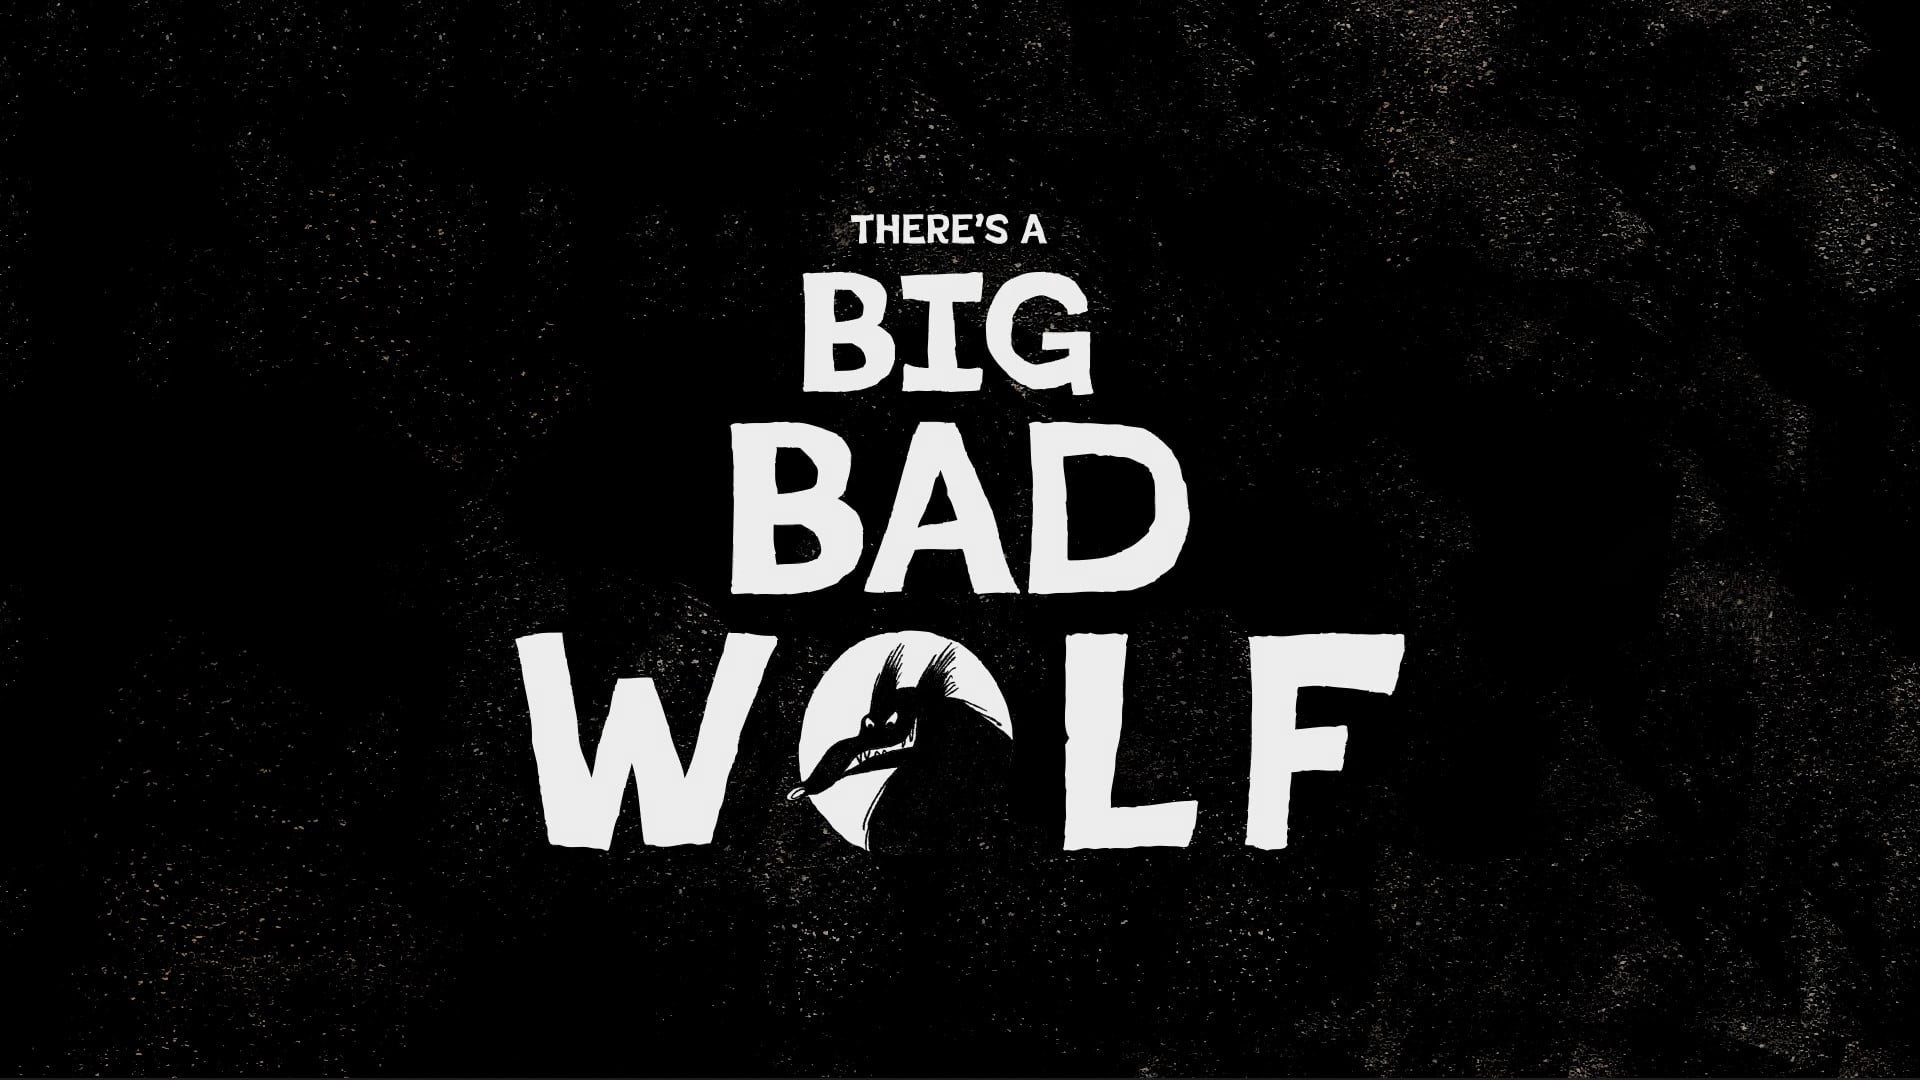 There's a Big Bad Wolf